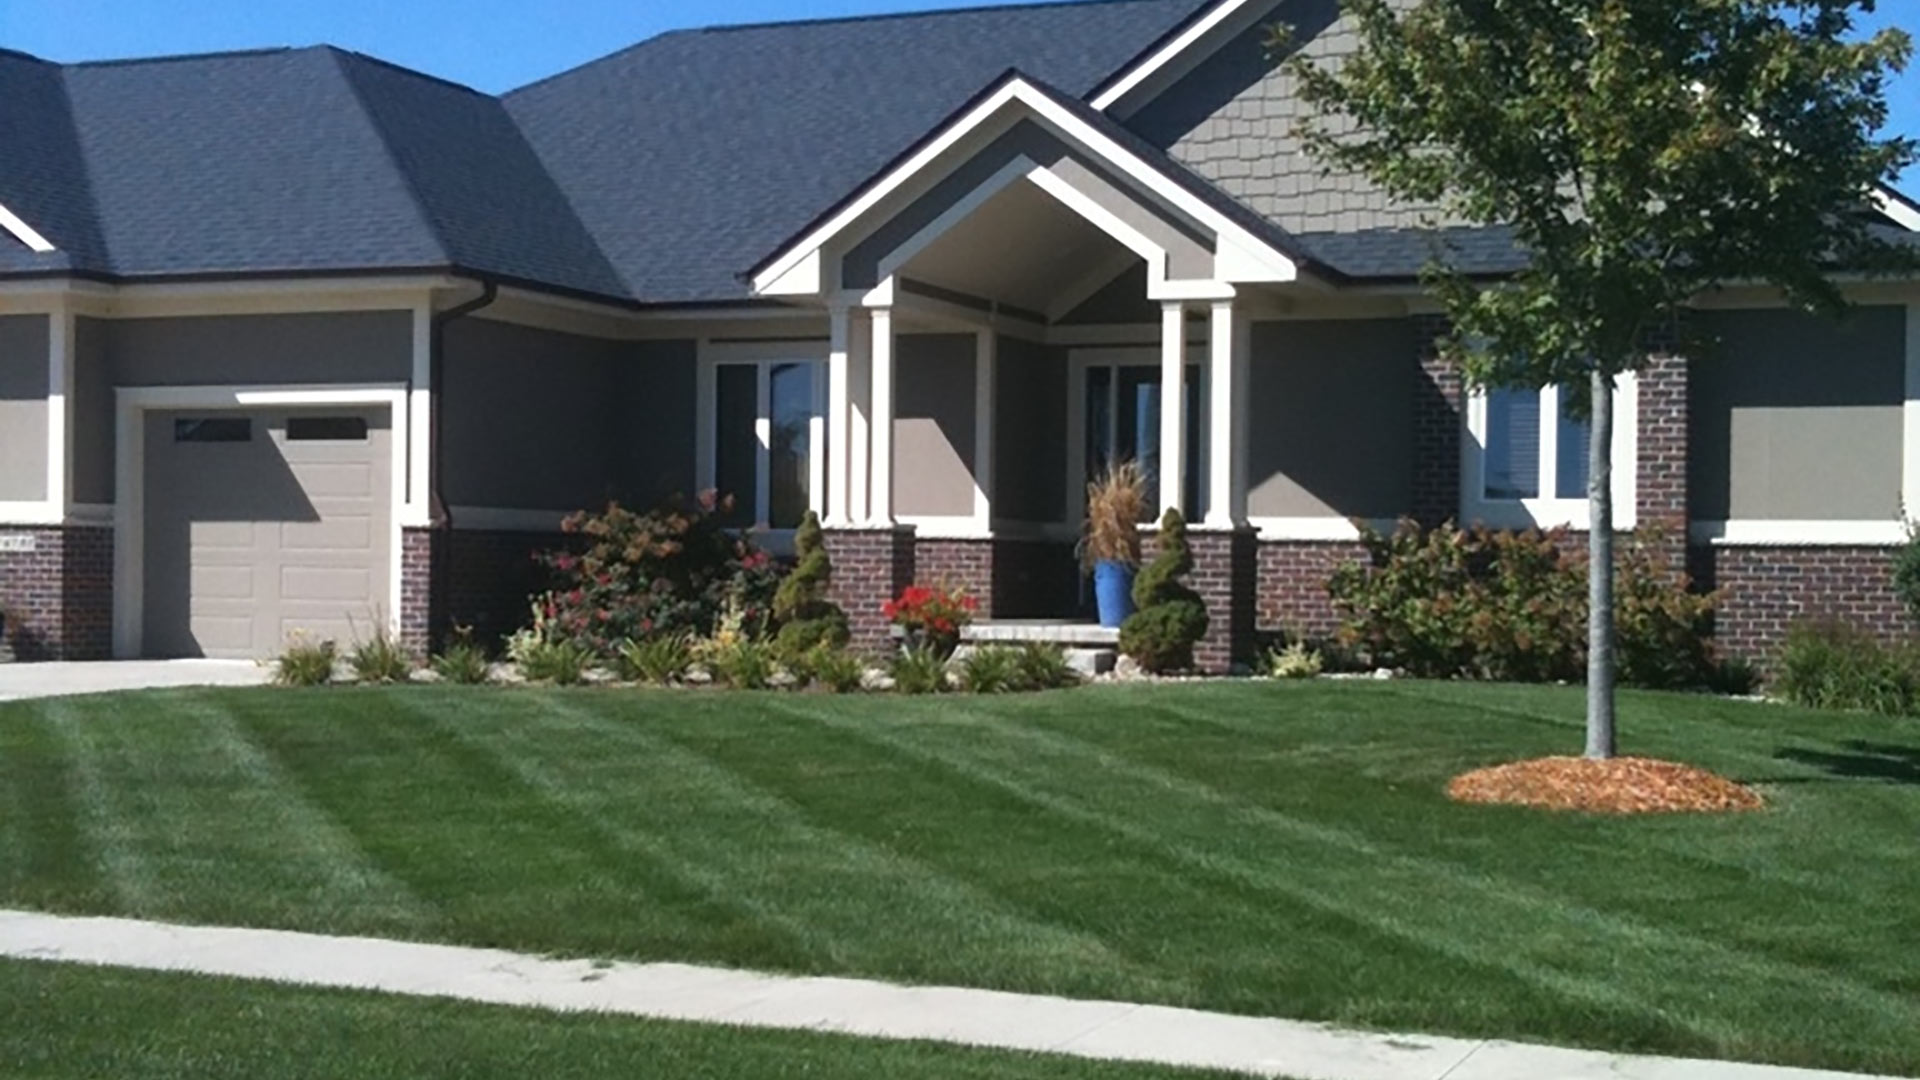  A professionally maintained lawn and landscape at a home in Des Moines, IA.